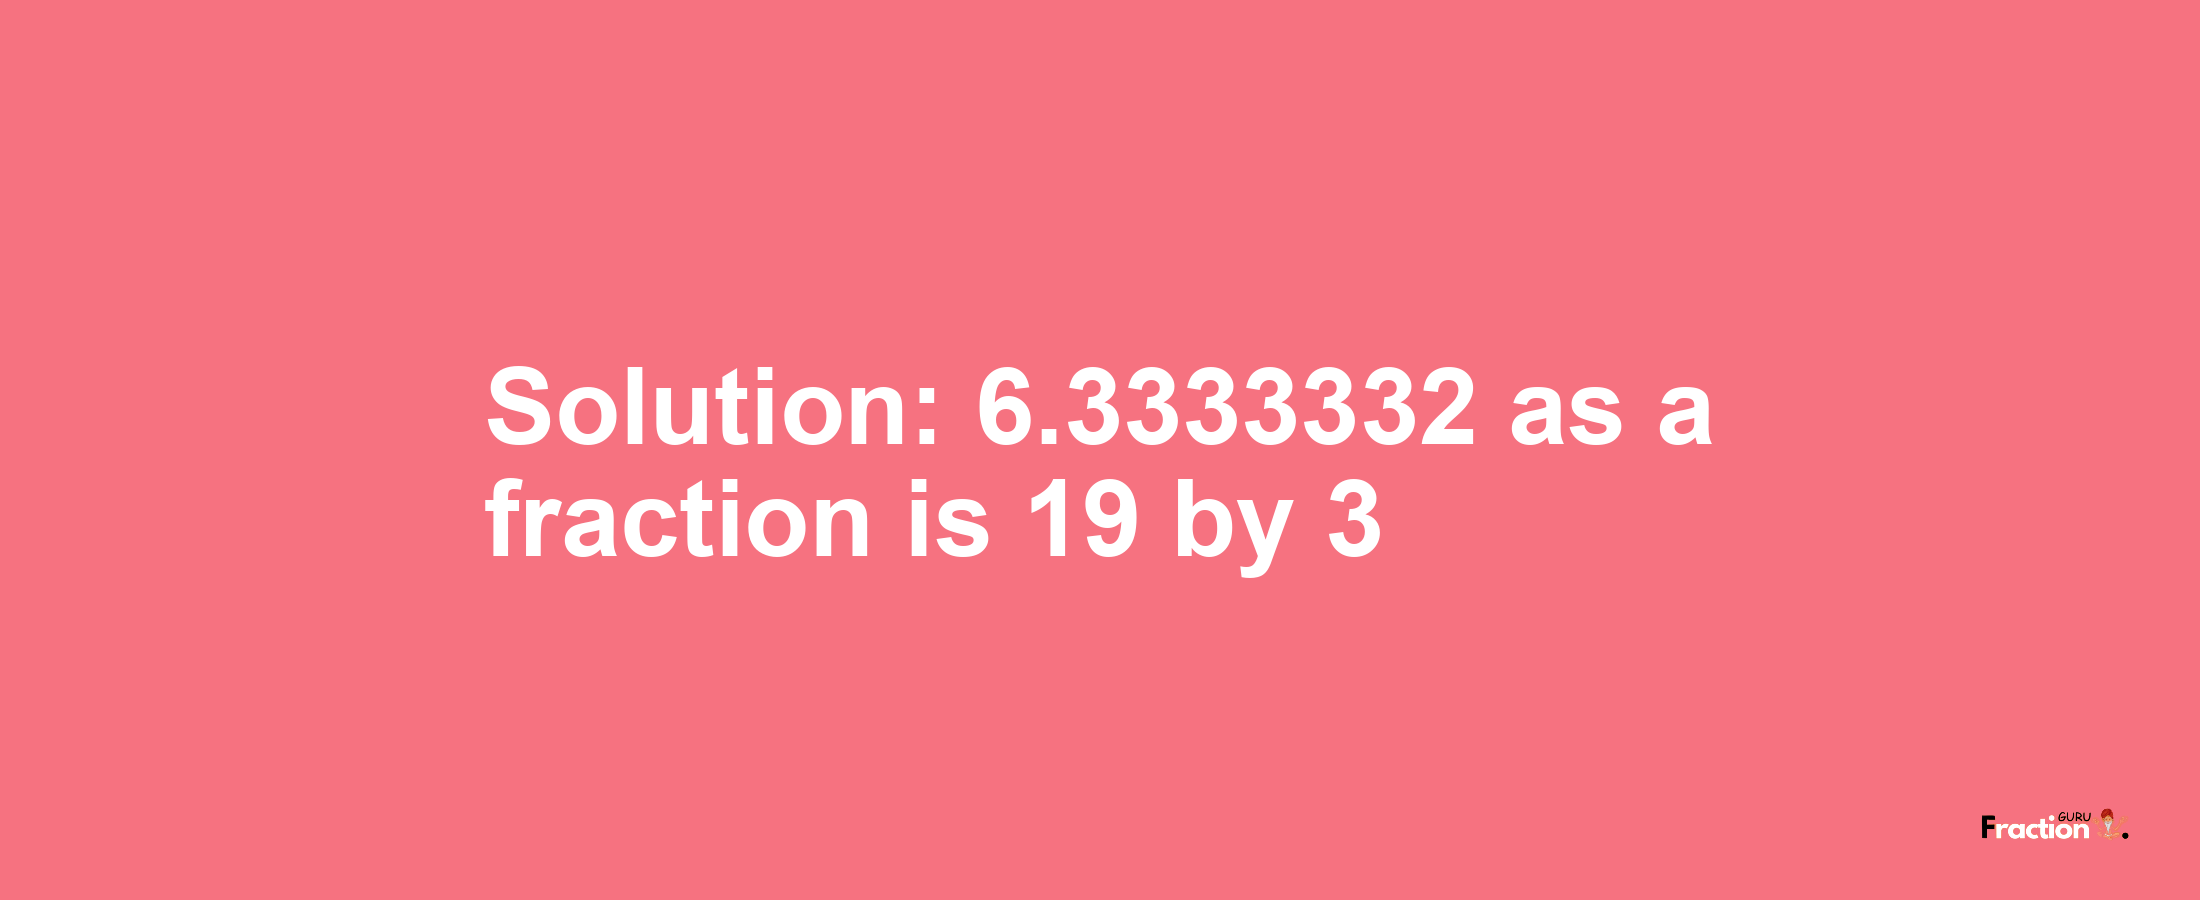 Solution:6.3333332 as a fraction is 19/3